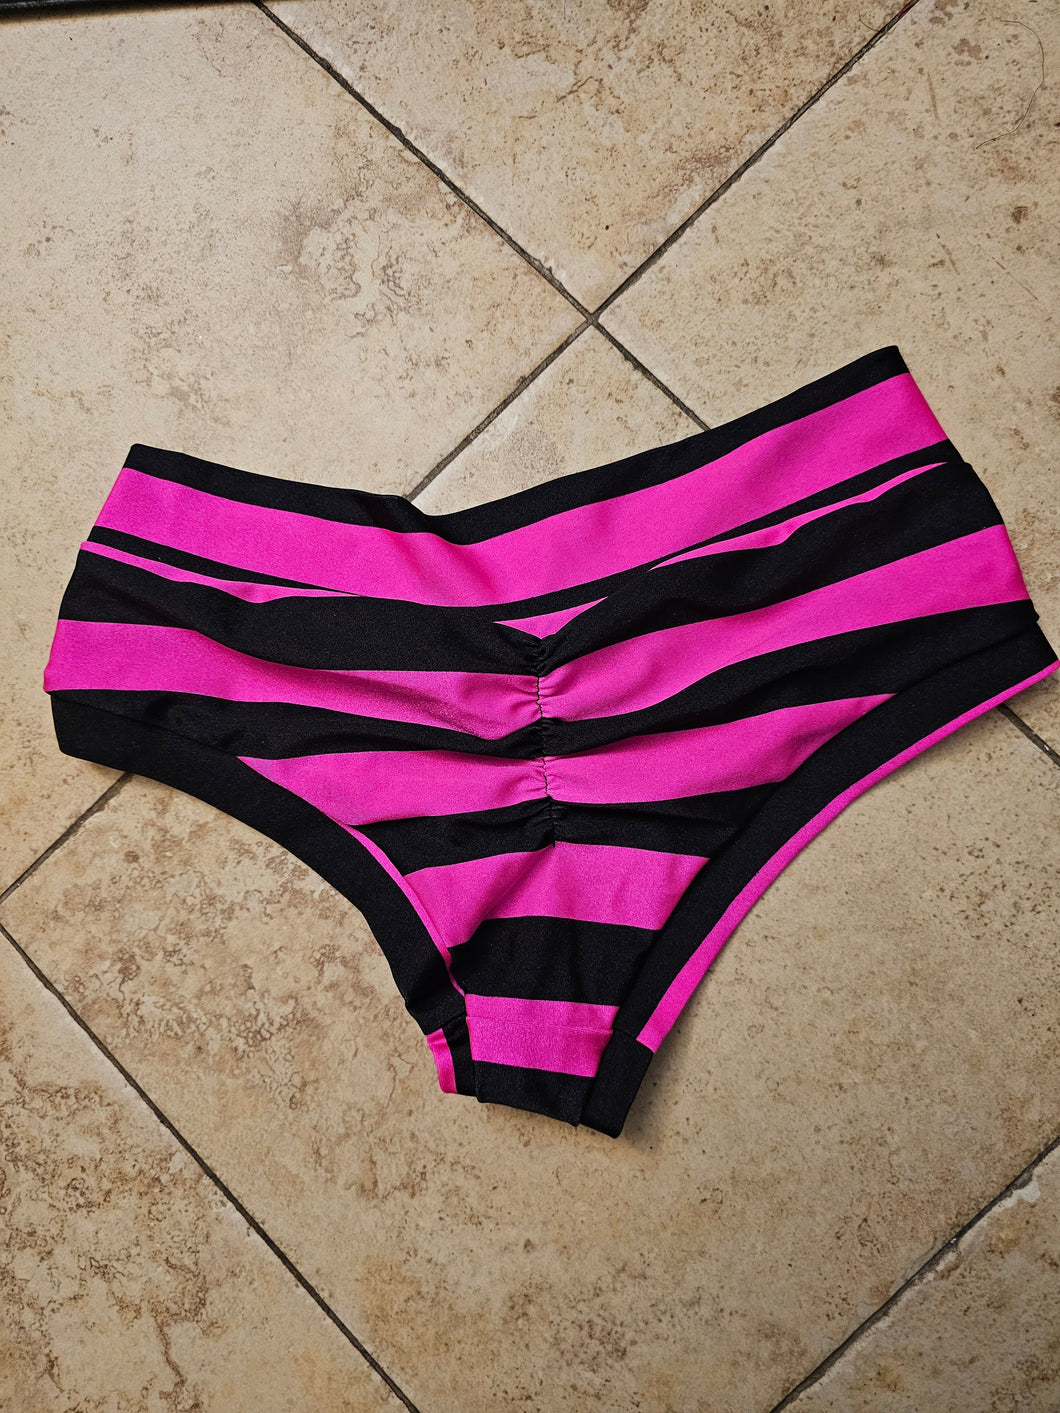 pink and black pole dance shorts